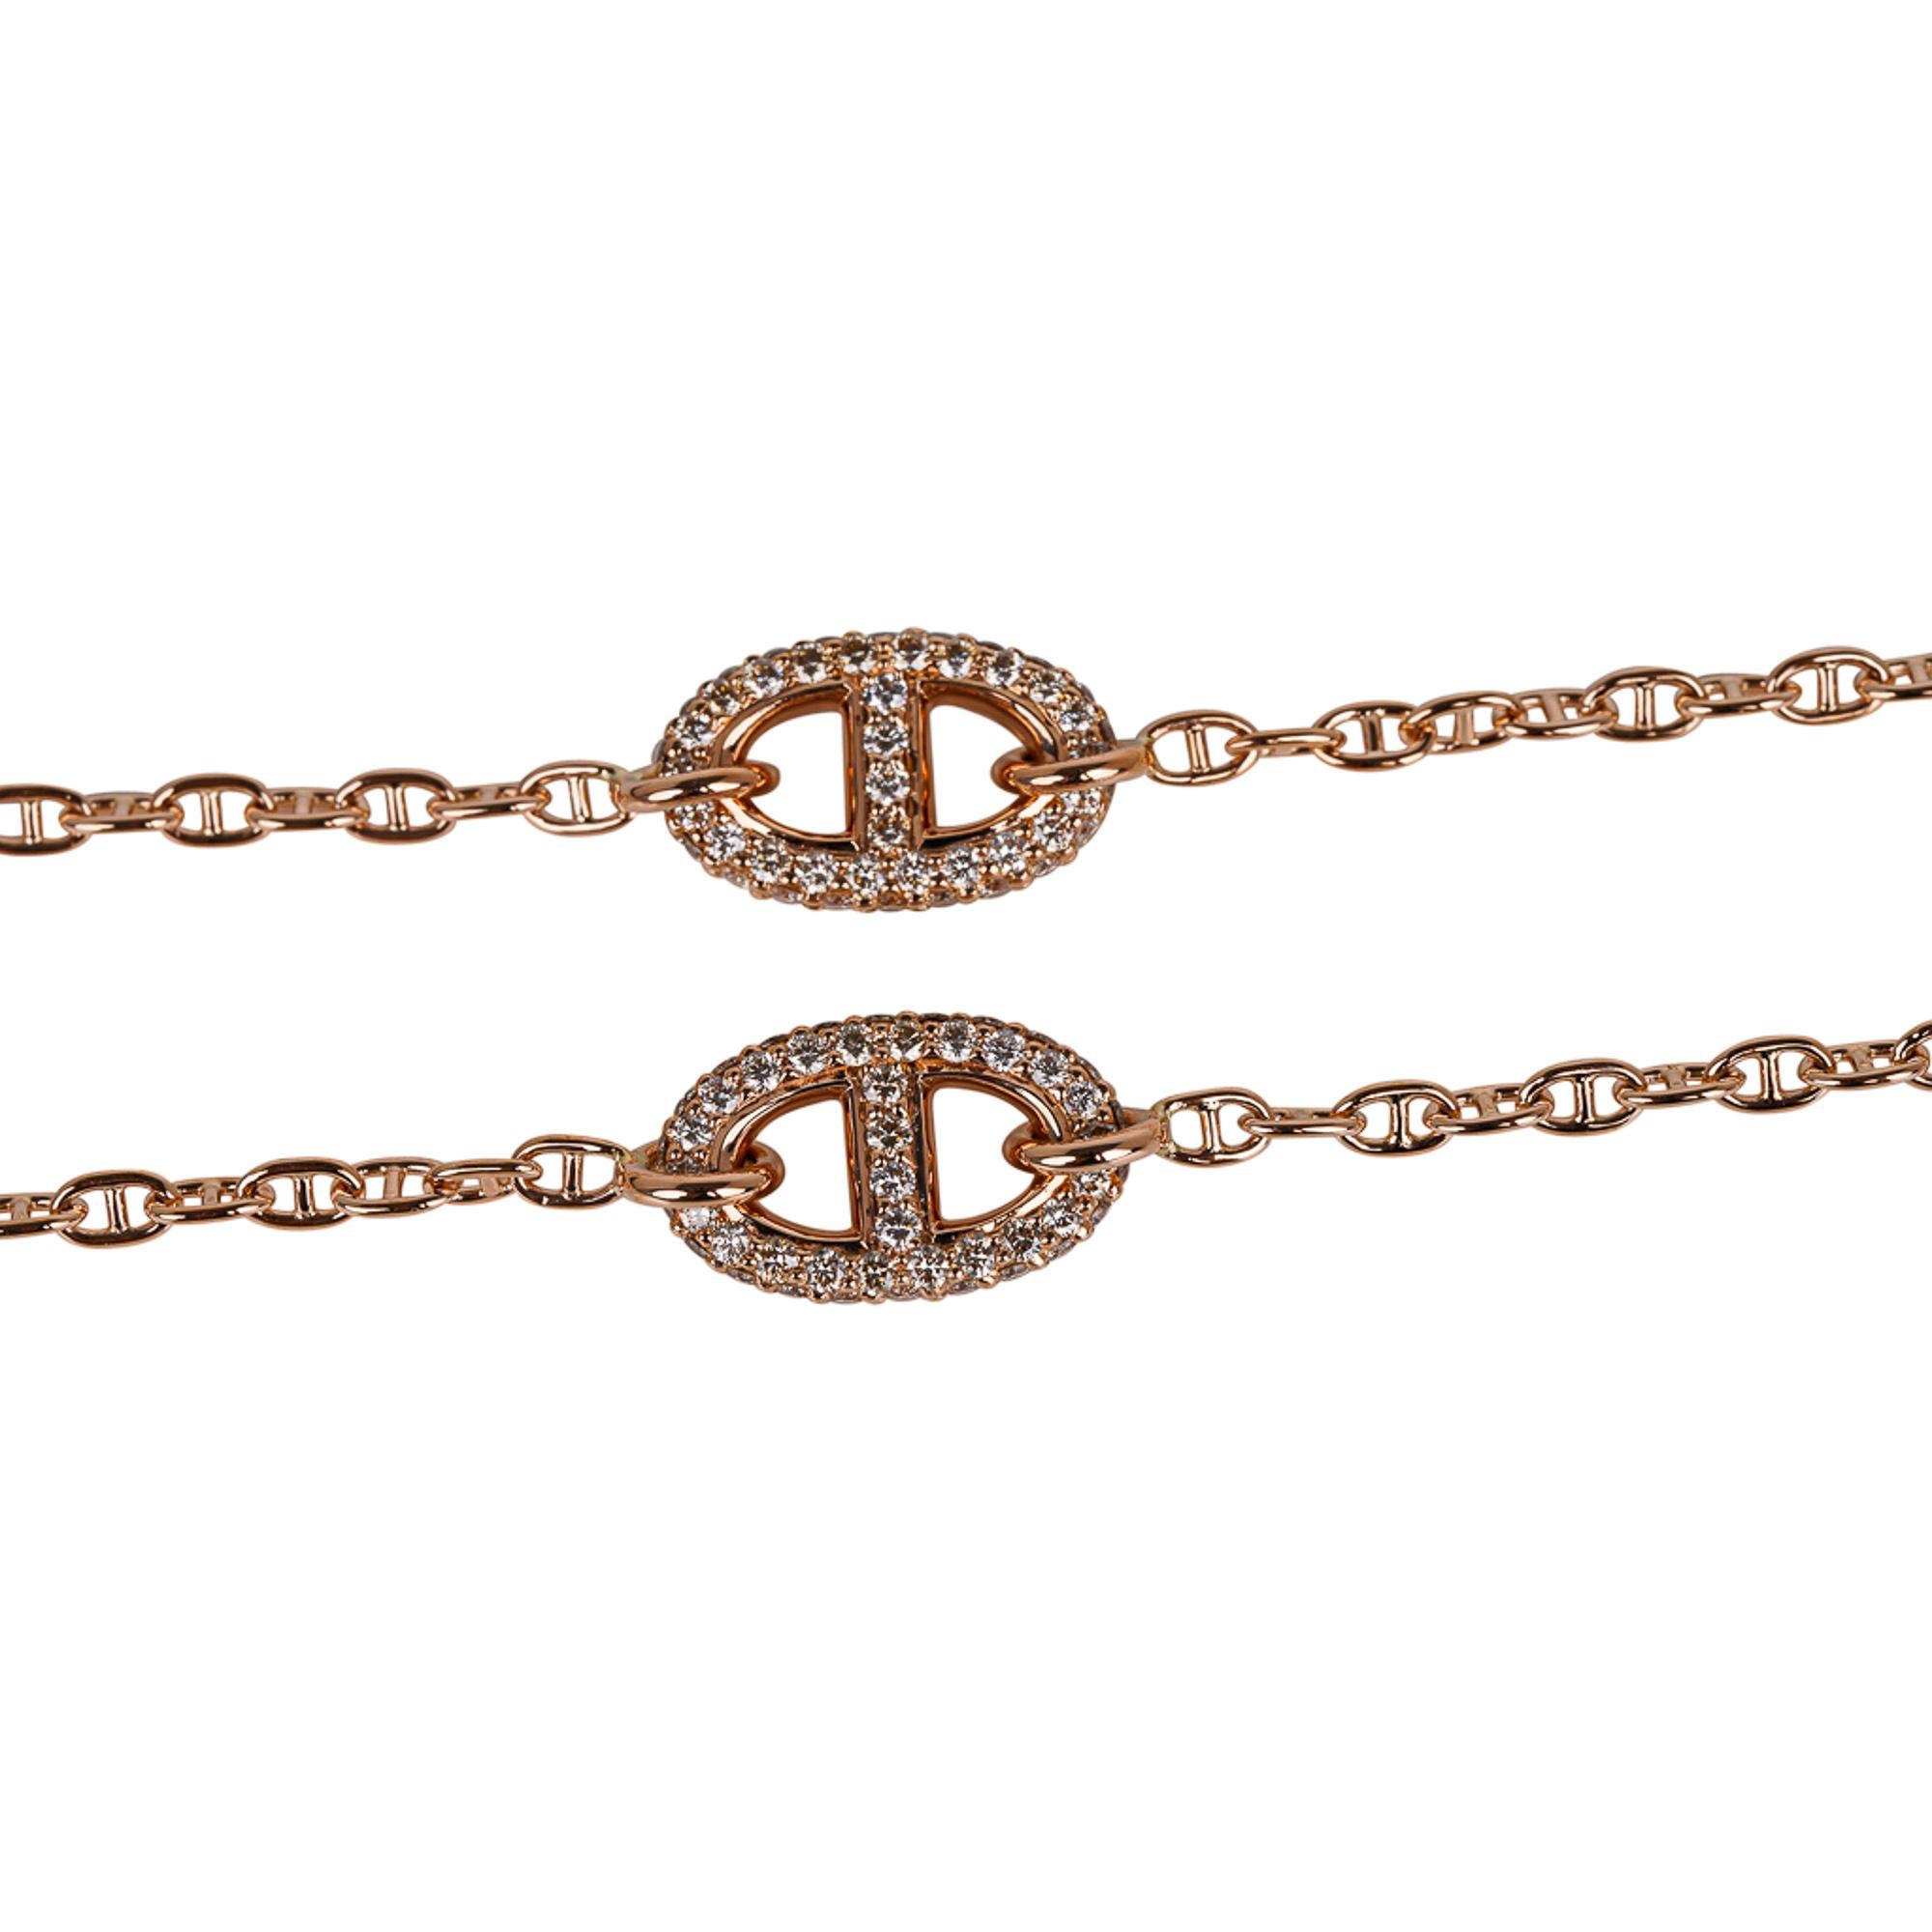 Mightychic offers an Hermes New Farandole necklace featured with Diamonds set in 18K Rose Gold.
Two diamond encrusted Chaine d'Ancre links and 3 smaller rose gold Chaine d'Ancre links.
Set with approximately 96 diamonds with 0.9ct total carat